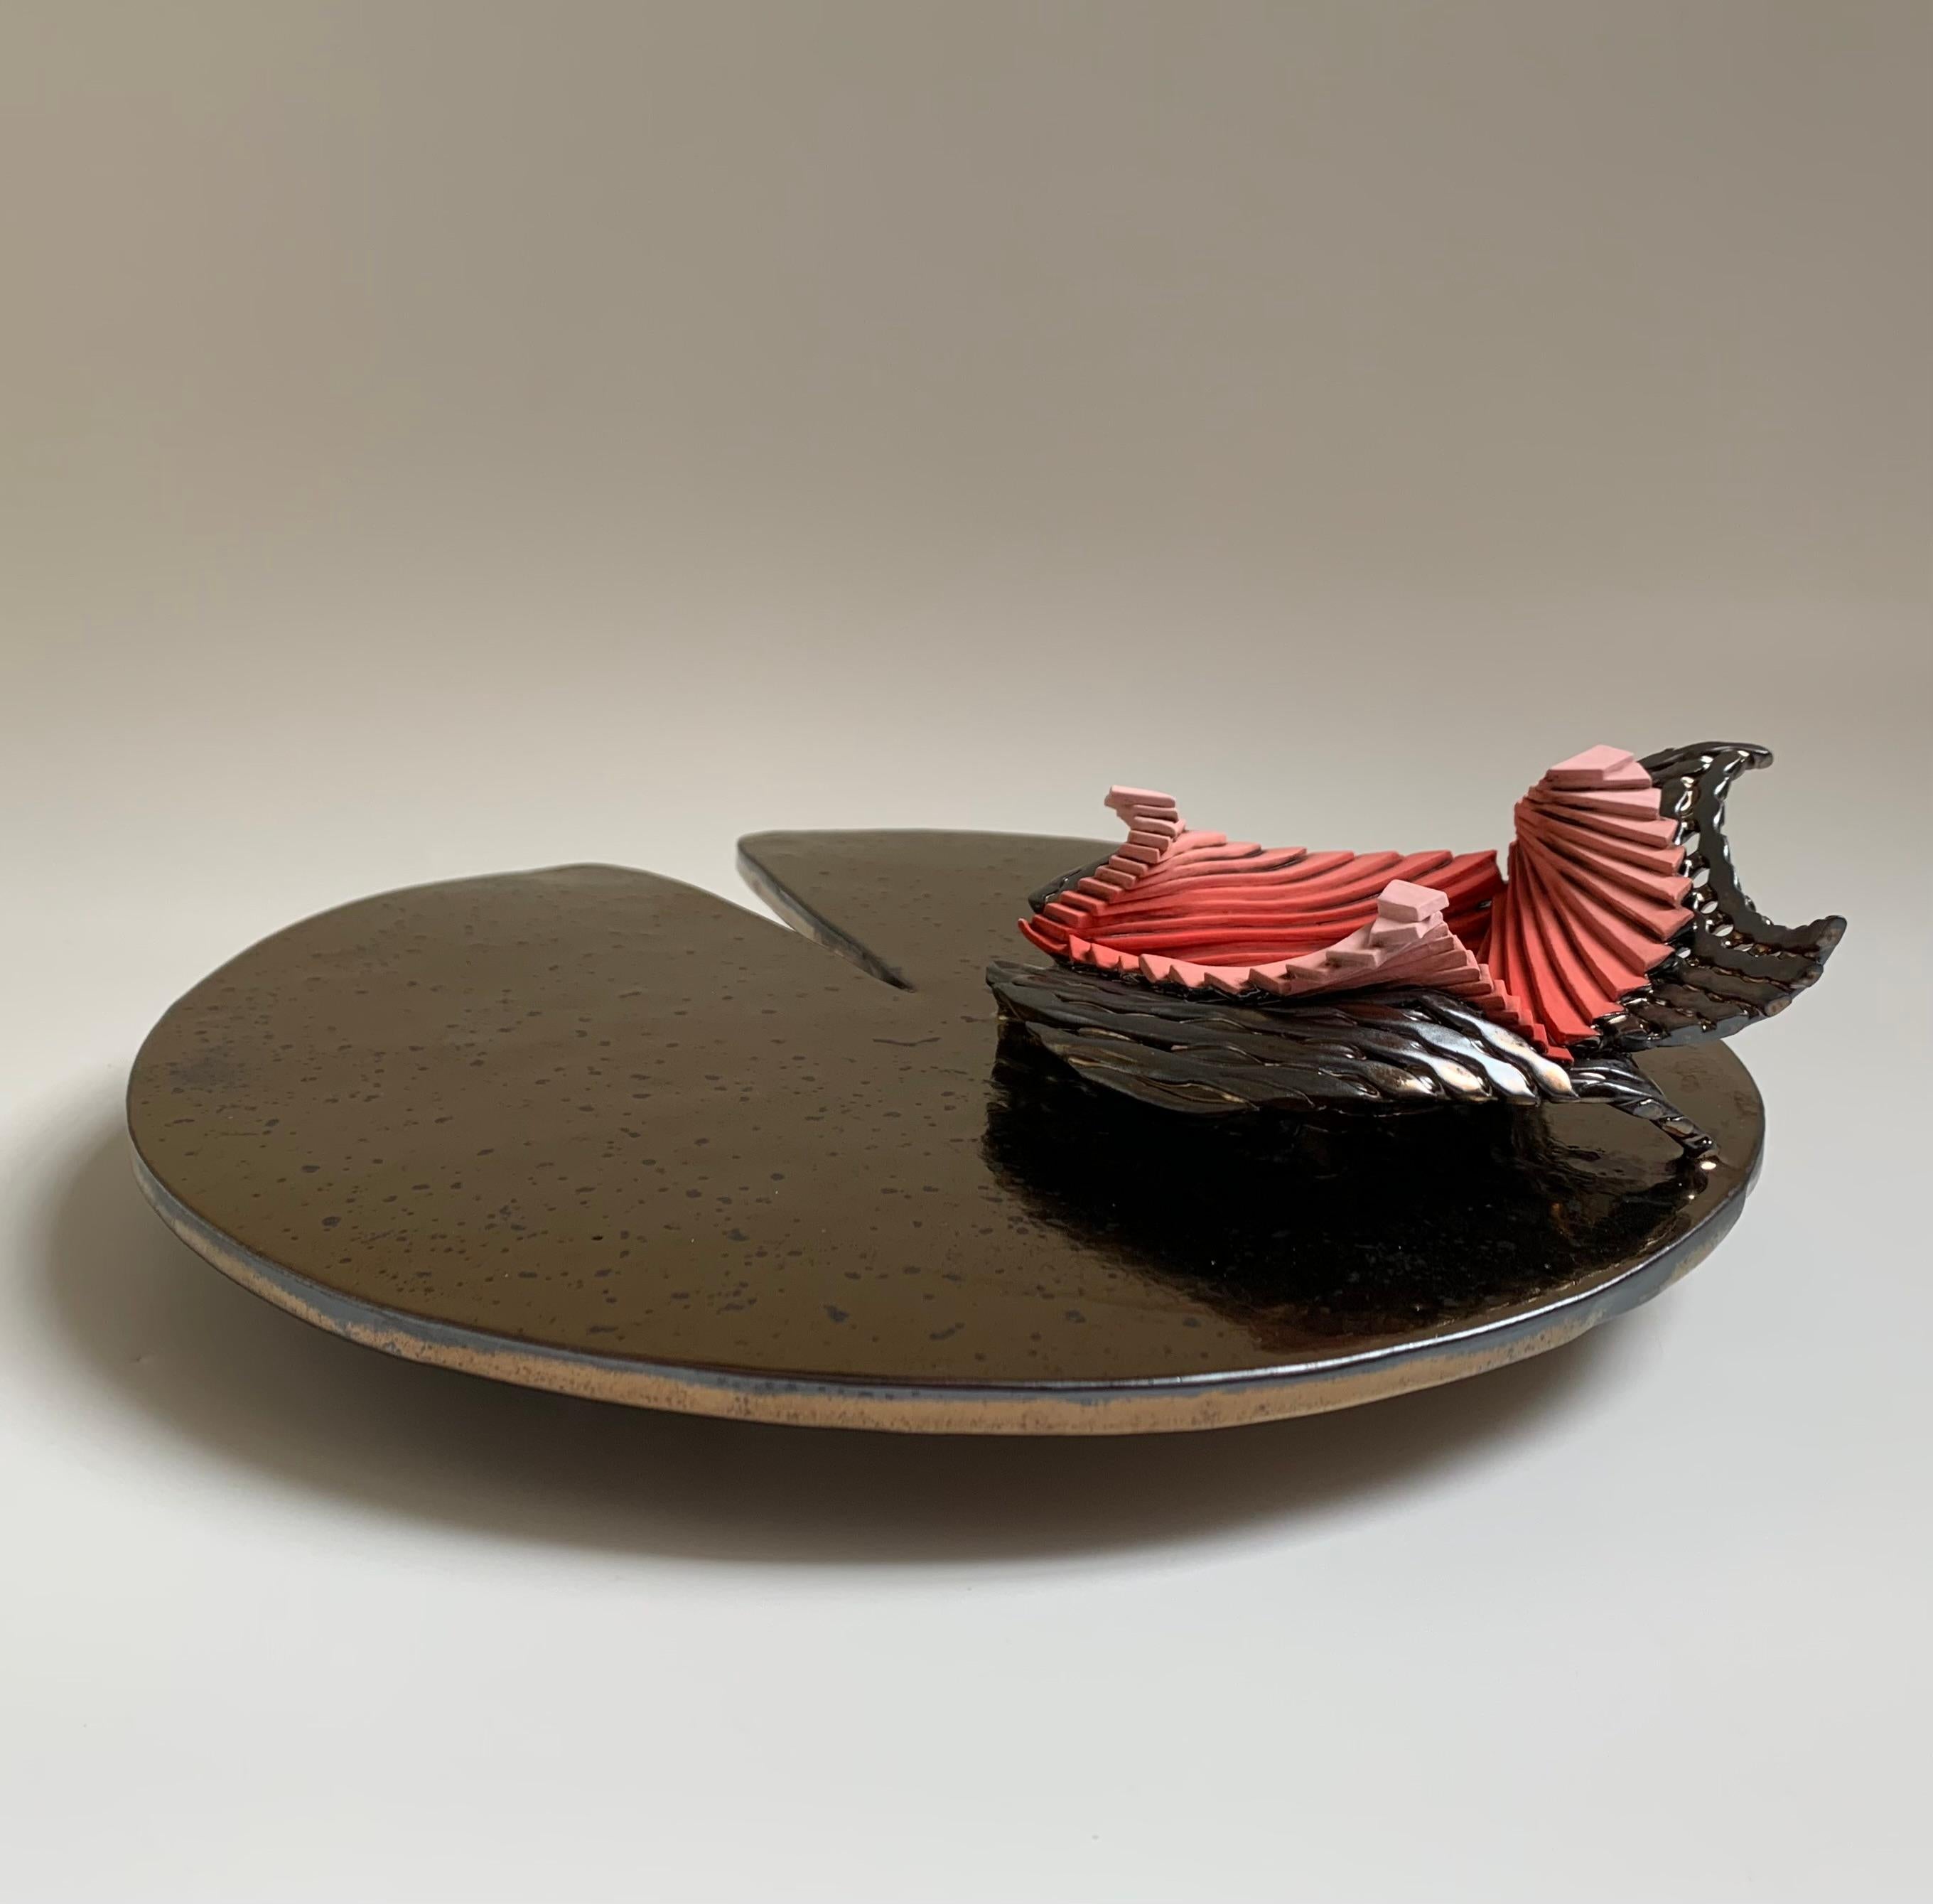 Ceramic lily pad is a handmade table sculpture. Finished in a gold / bronze glaze, the flower is glazed gradient style...starting with terra-cotta at the center, fading into red, into pink. Lily pad sculpture is handmade, with woven strands